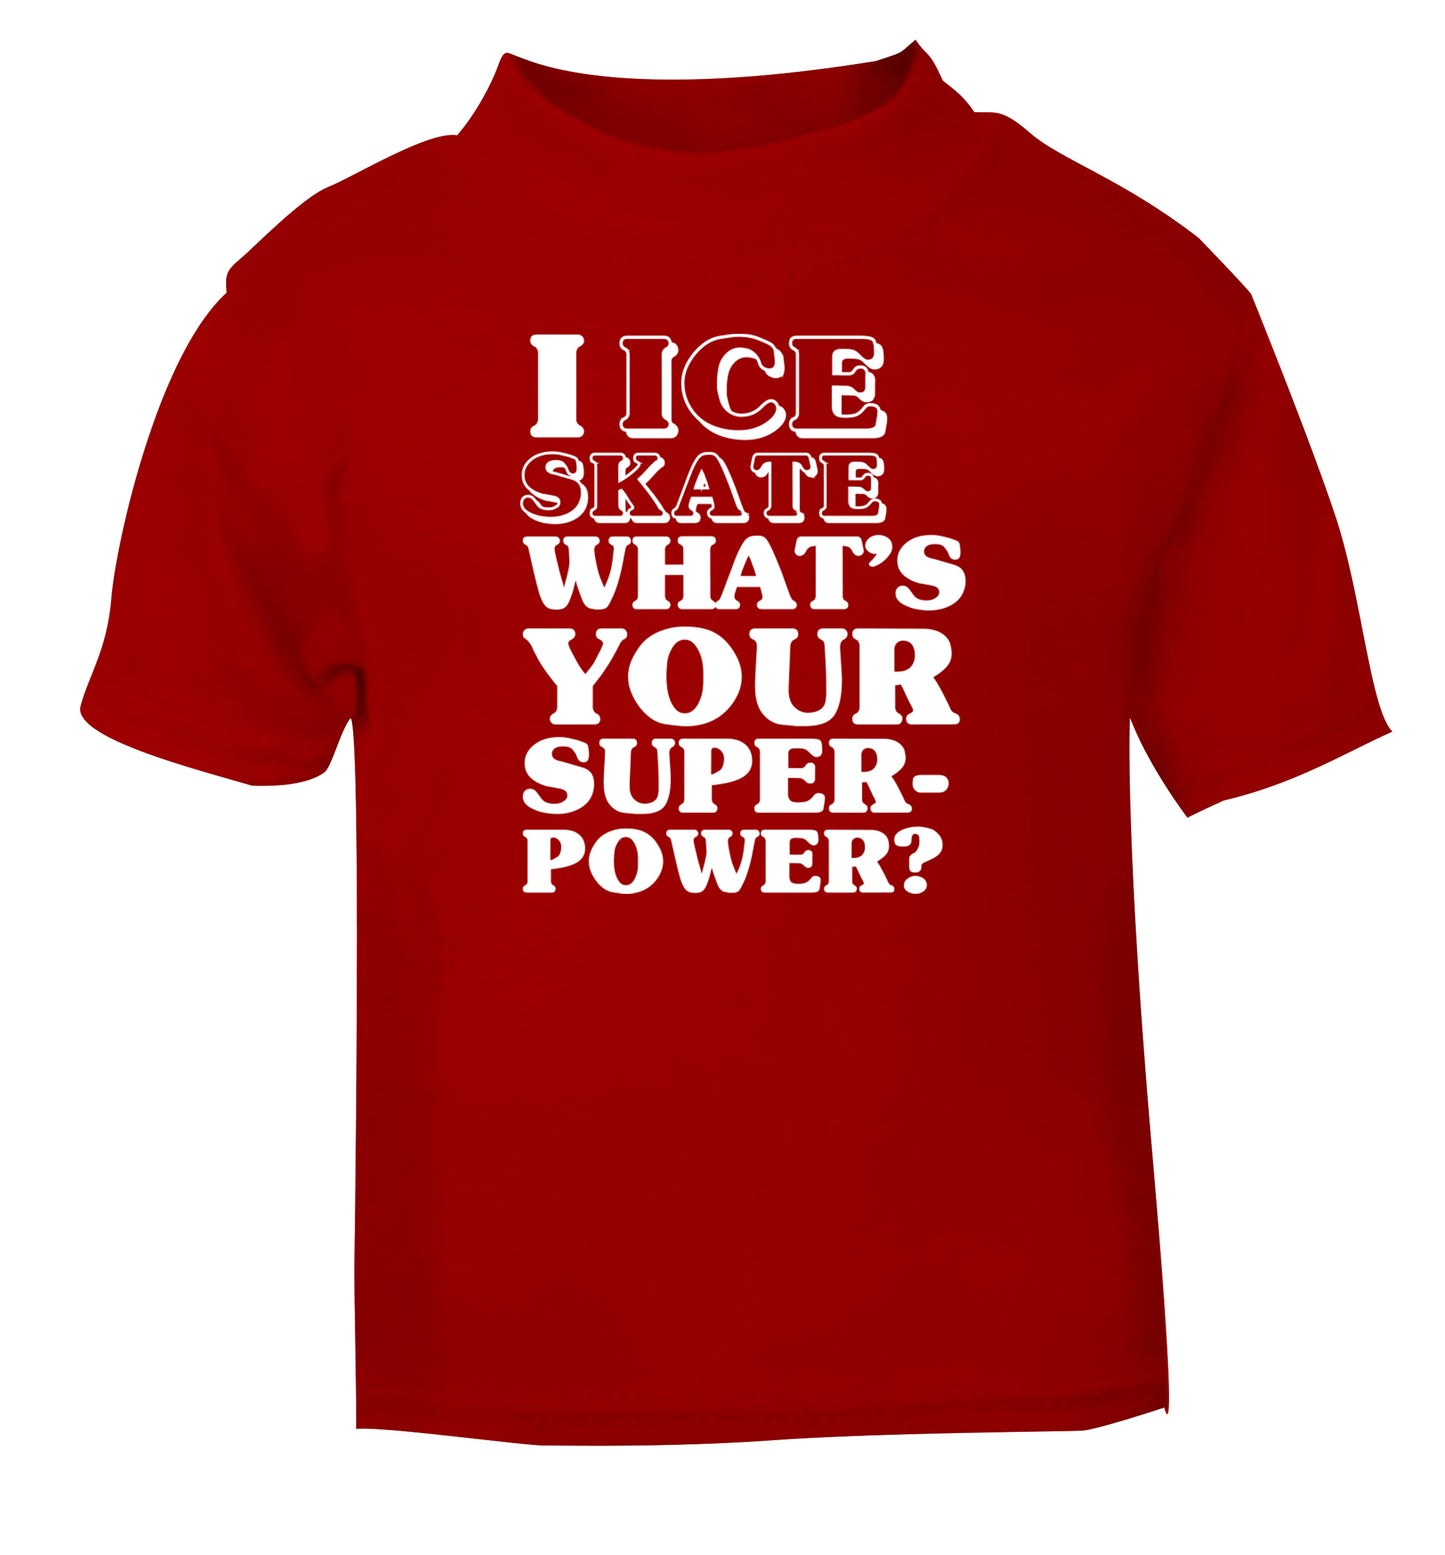 I ice skate what's your superpower? red Baby Toddler Tshirt 2 Years